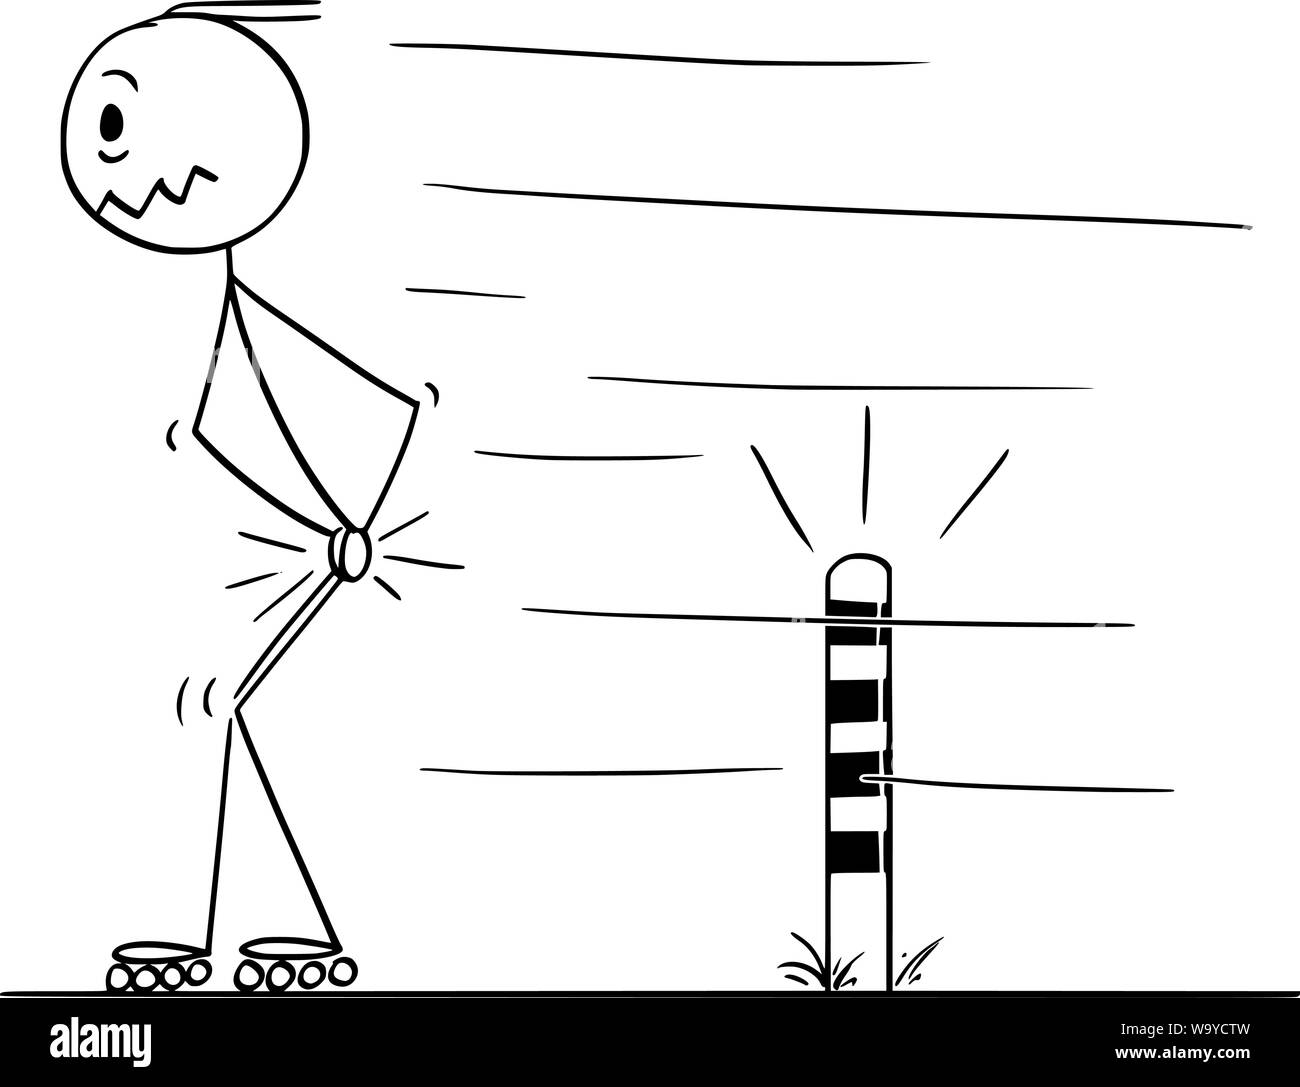 Vector cartoon stick figure drawing conceptual illustration of man skating on inline skates, and painfully hit his testicles when passing small post on the road. Stock Vector